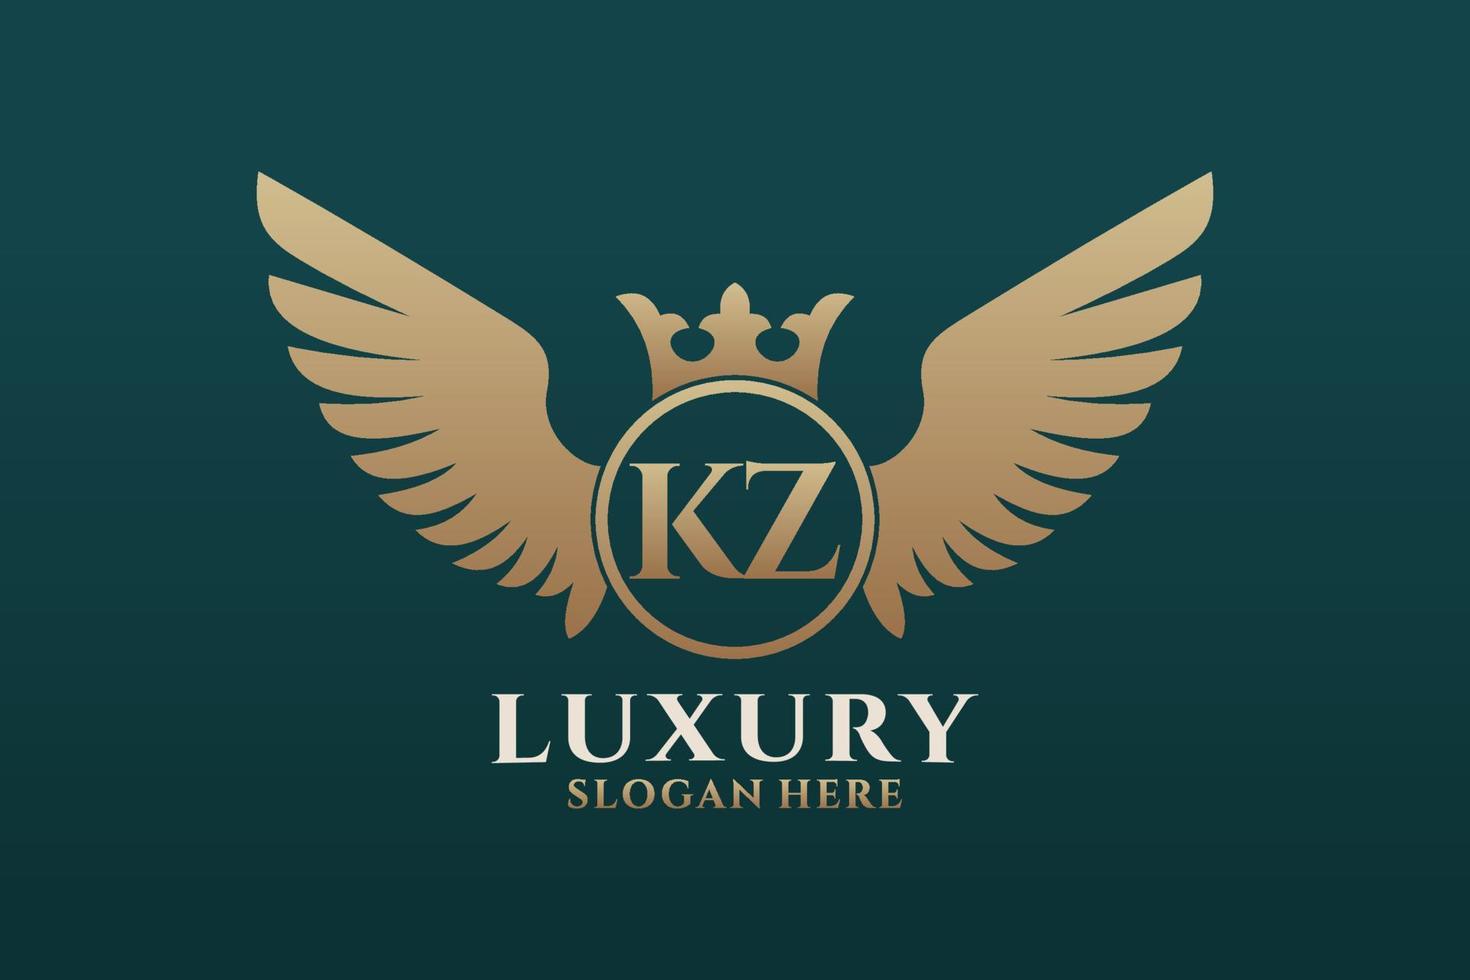 Luxury royal wing Letter KZ crest Gold color Logo vector, Victory logo, crest logo, wing logo, vector logo template.